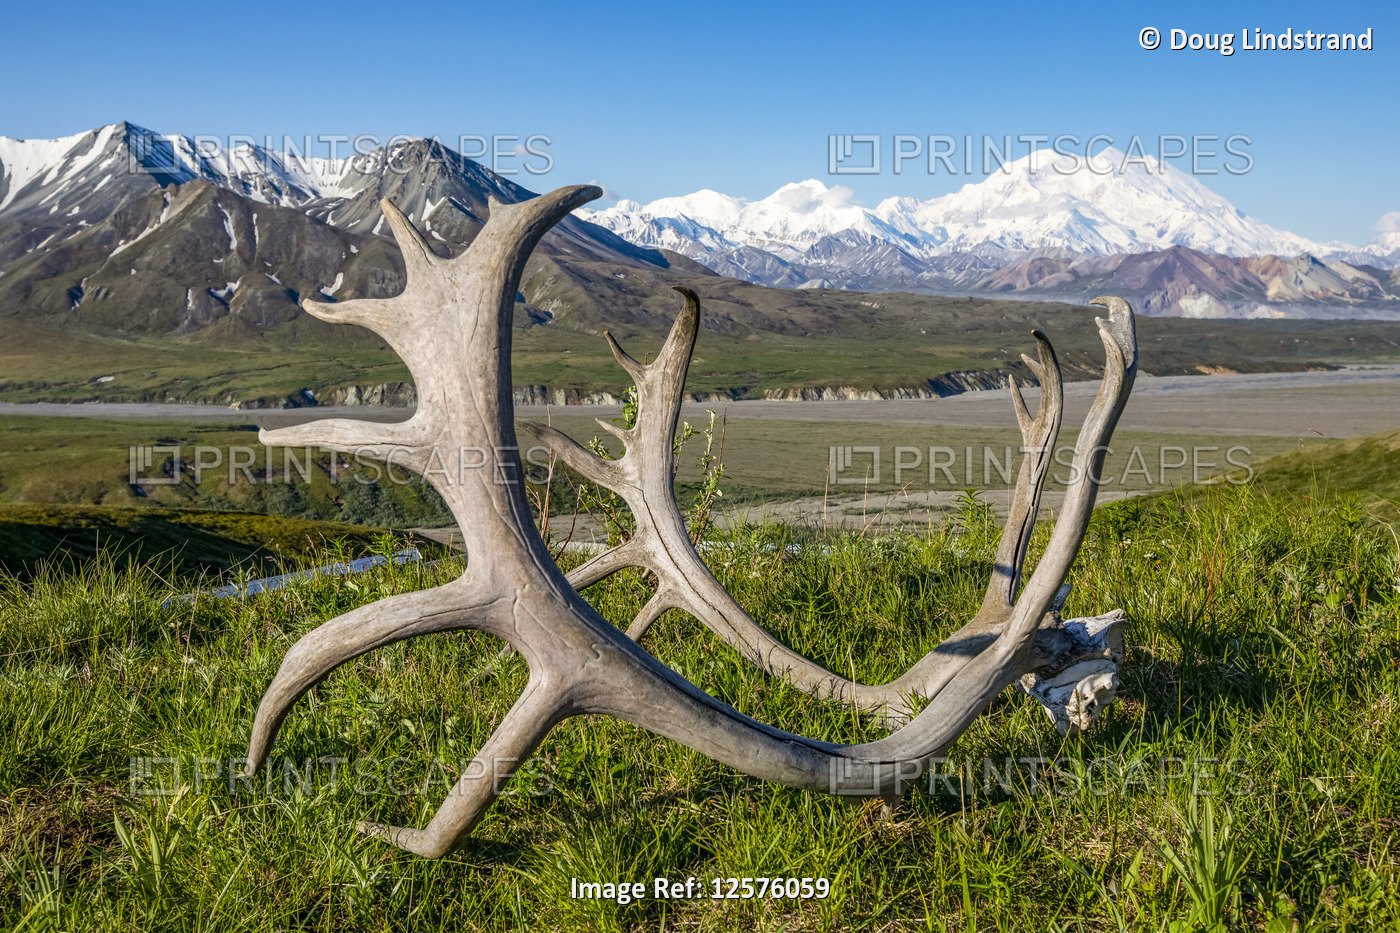 Caribou antlers sit on the grass in the foreground with a view of Denali and ...